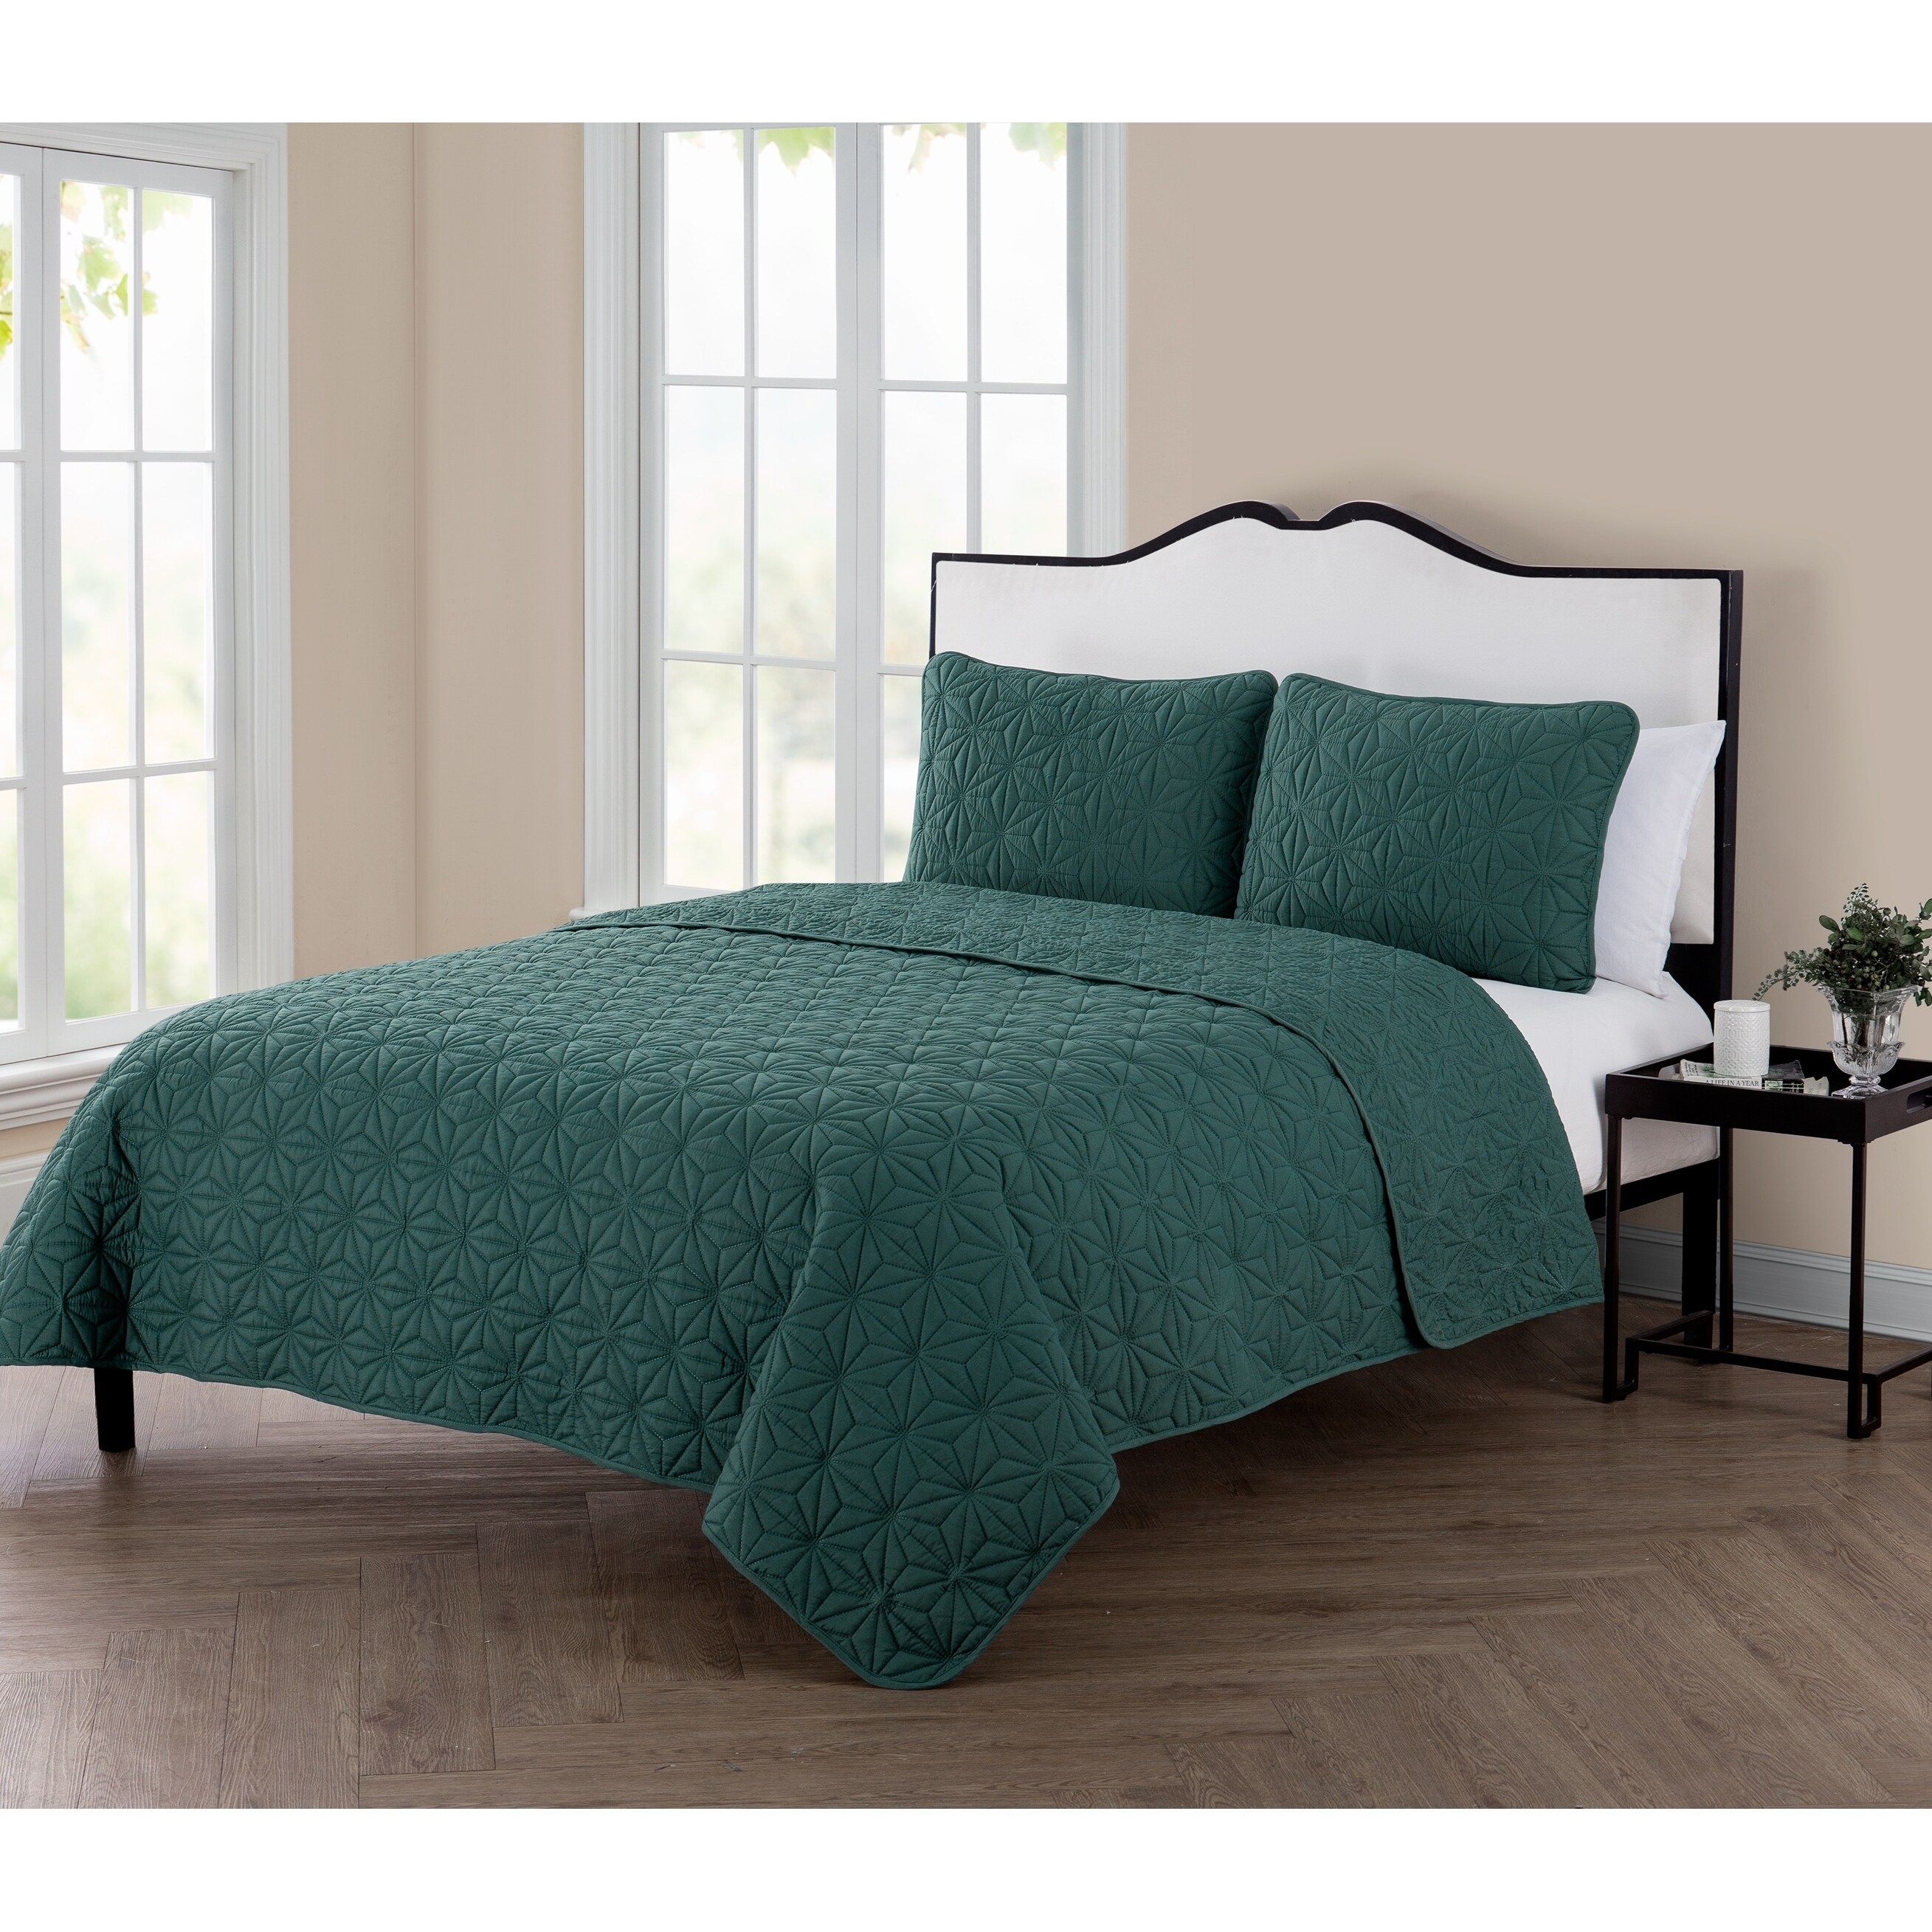 Solid Green Geo Embossed 3 pc Quilt Set Coverlet Twin Full Queen King Size Bed